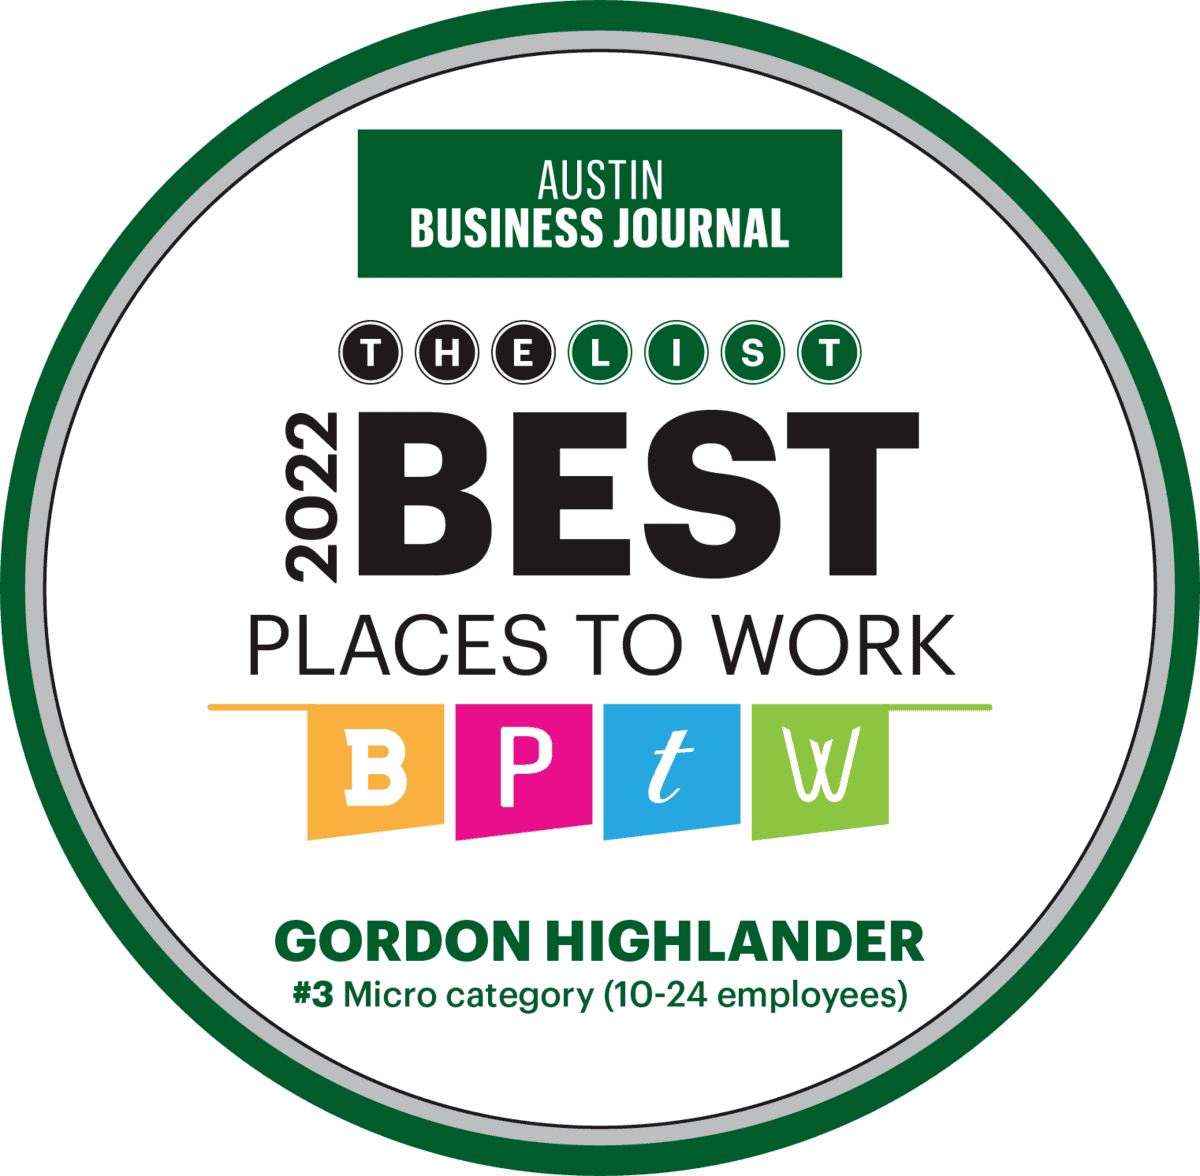 Gordon Highlander received the Best Places to Work award in 2019